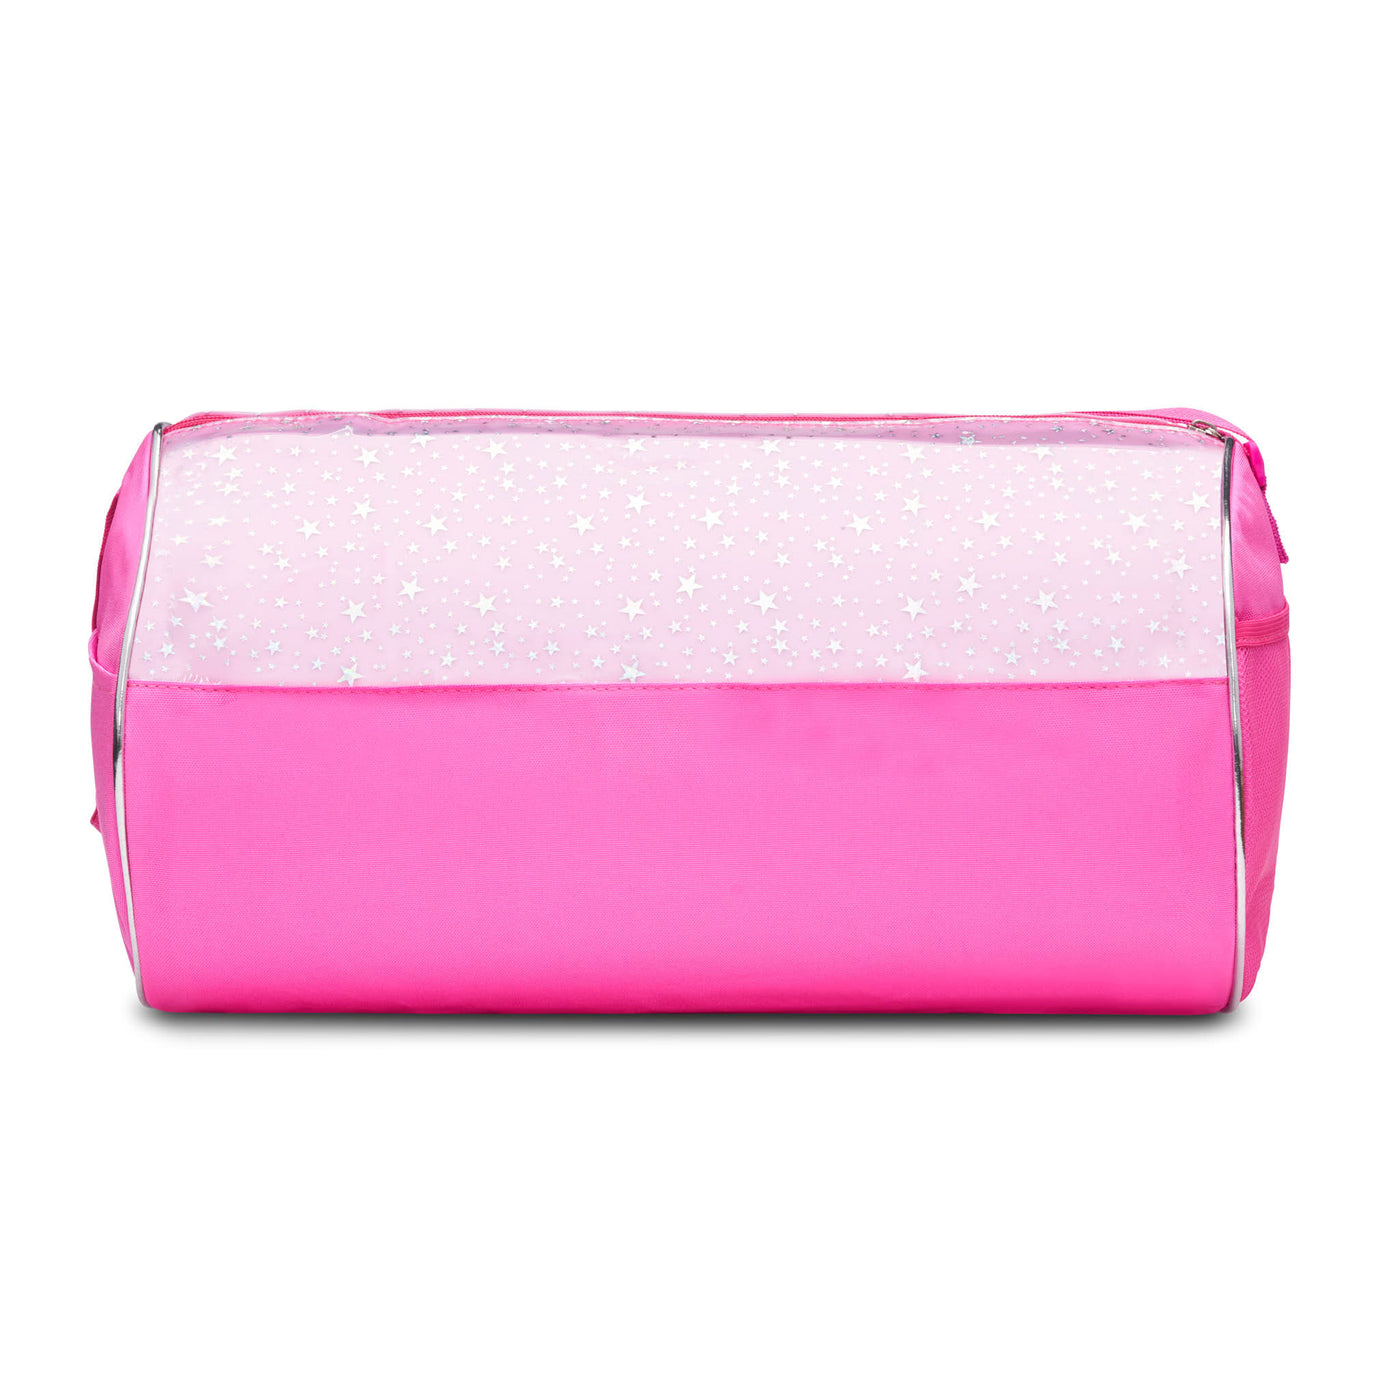 Dance Duffel Bag Pink and Clear with Silver Stars